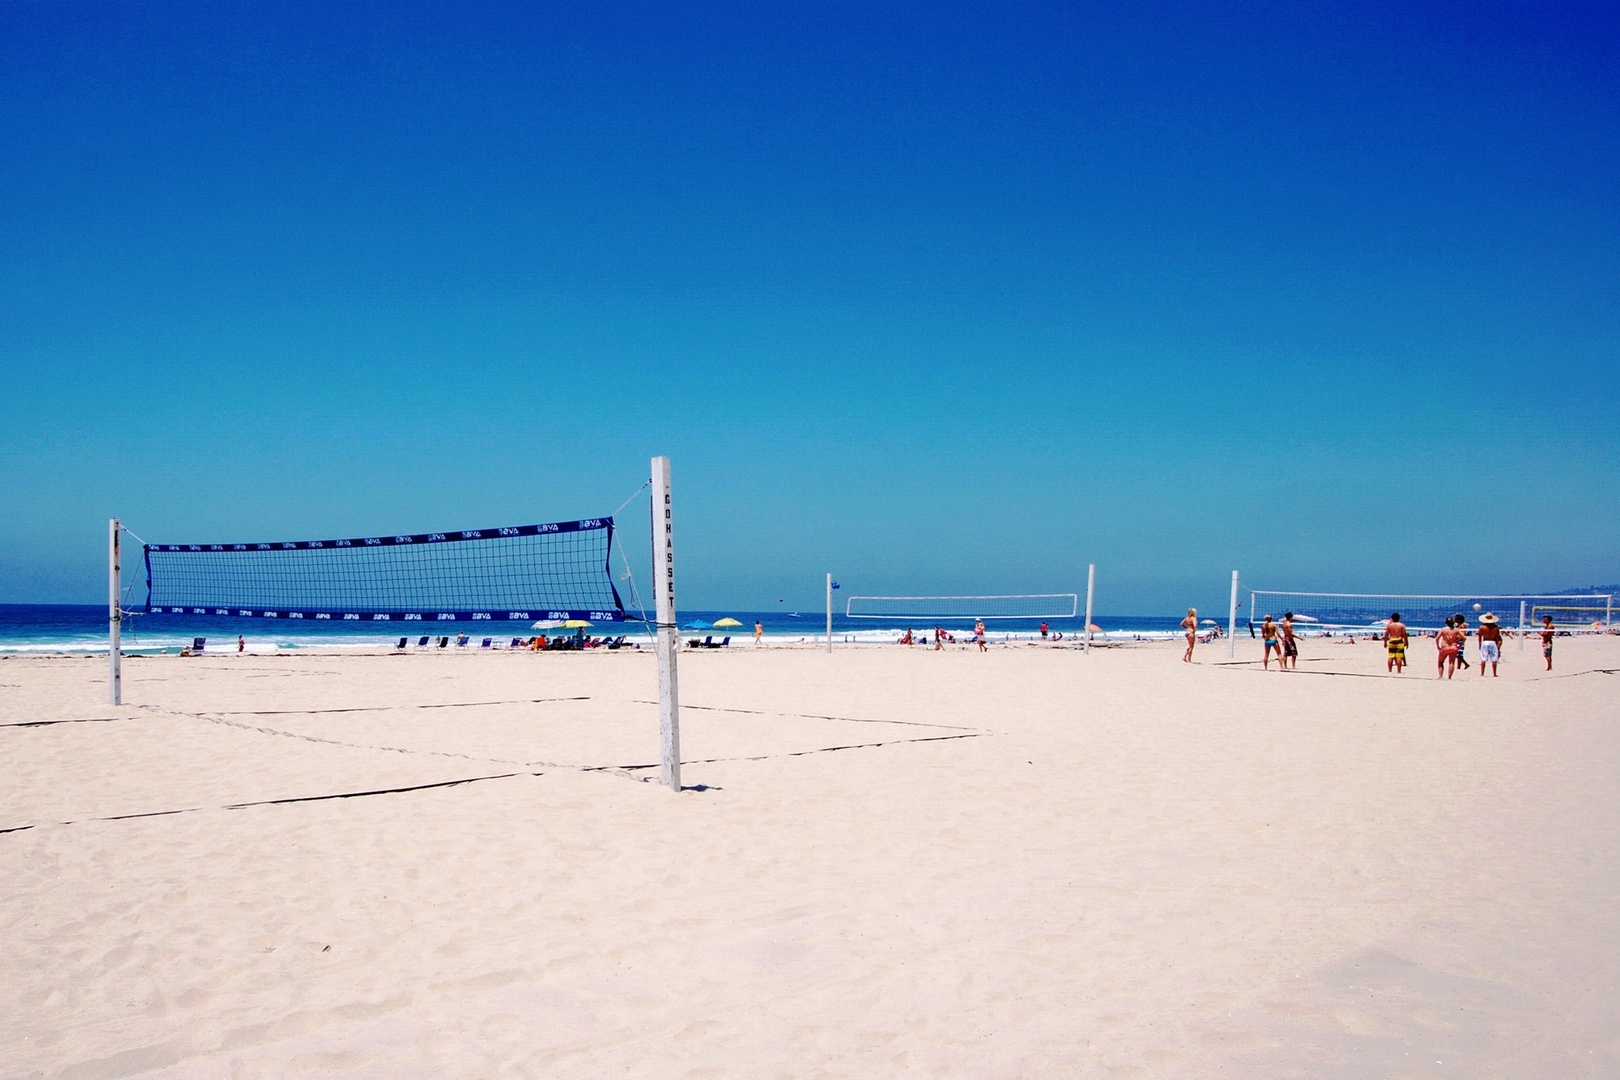 Volleyball courts on the nearby beach